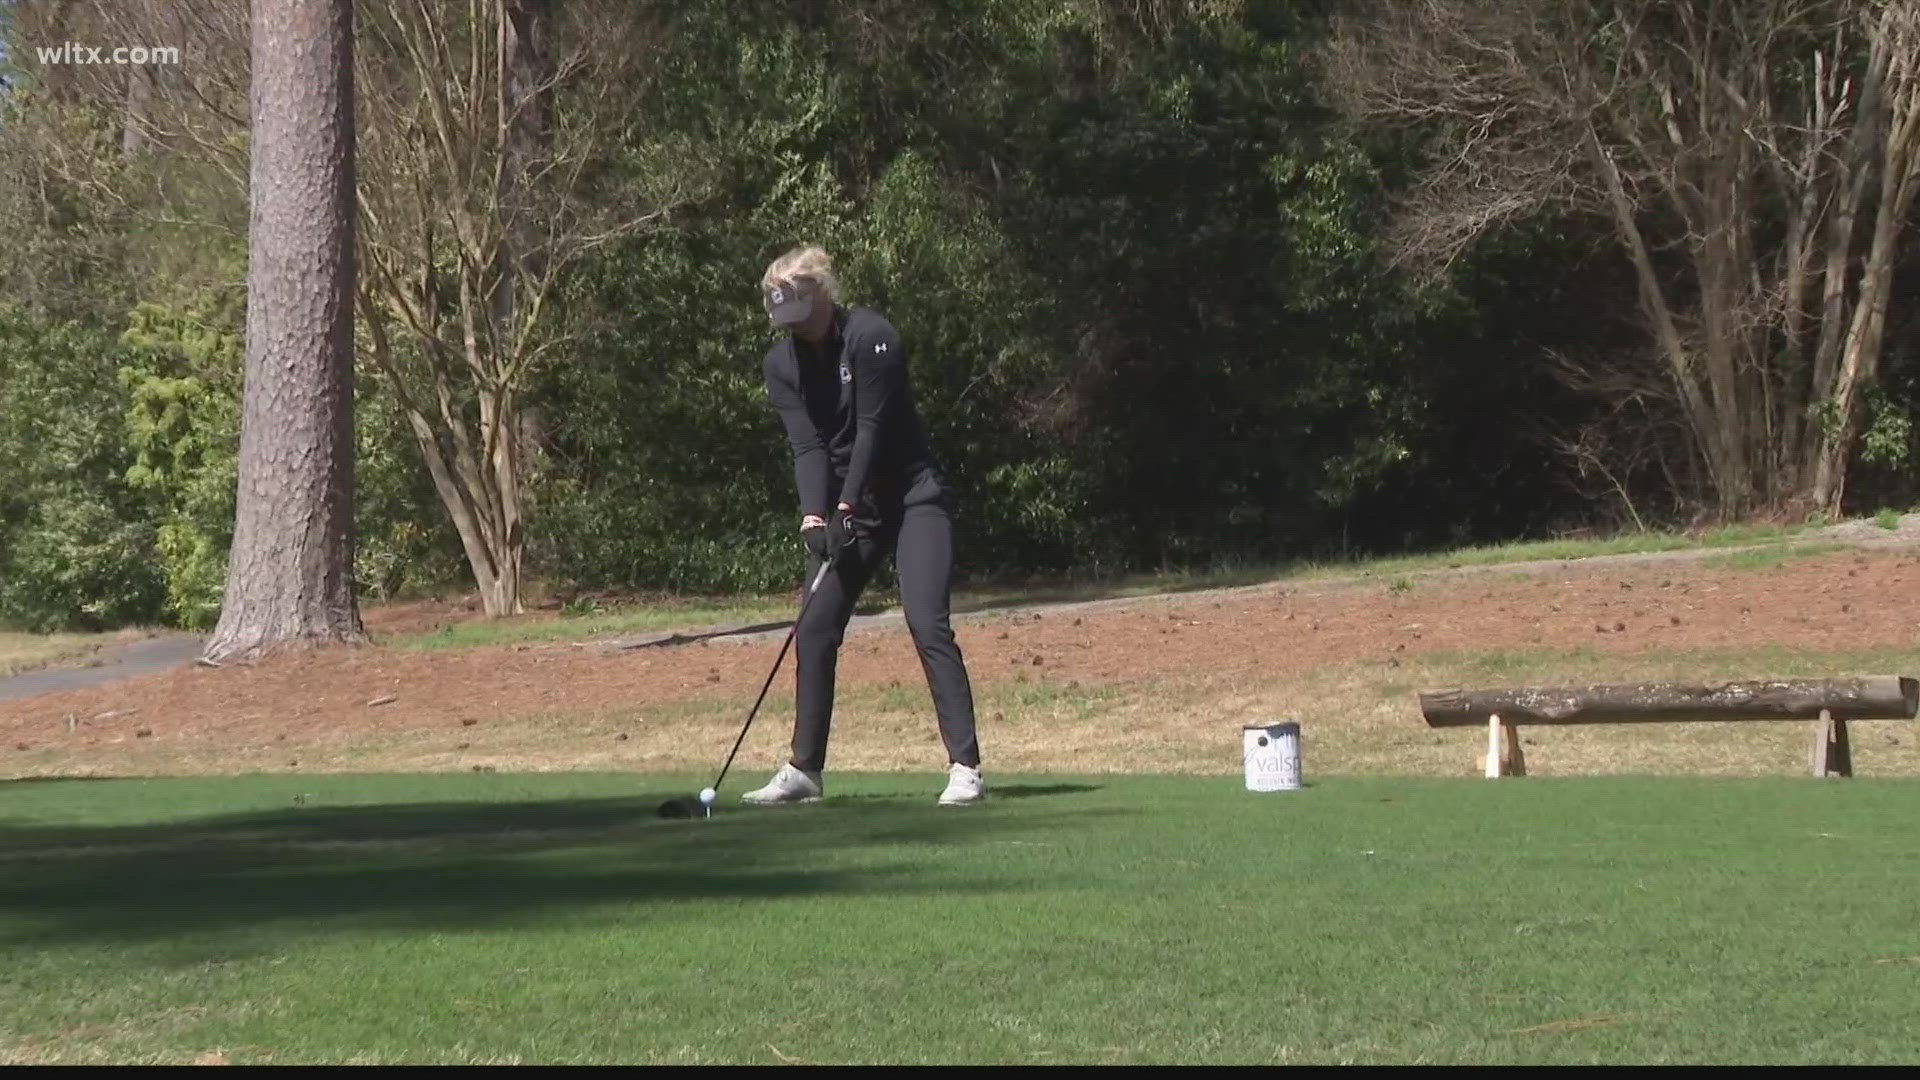 The second-ranked South Carolina women's golf team continues to chase a national championship and they will look to take the first step by advancing out of regionals